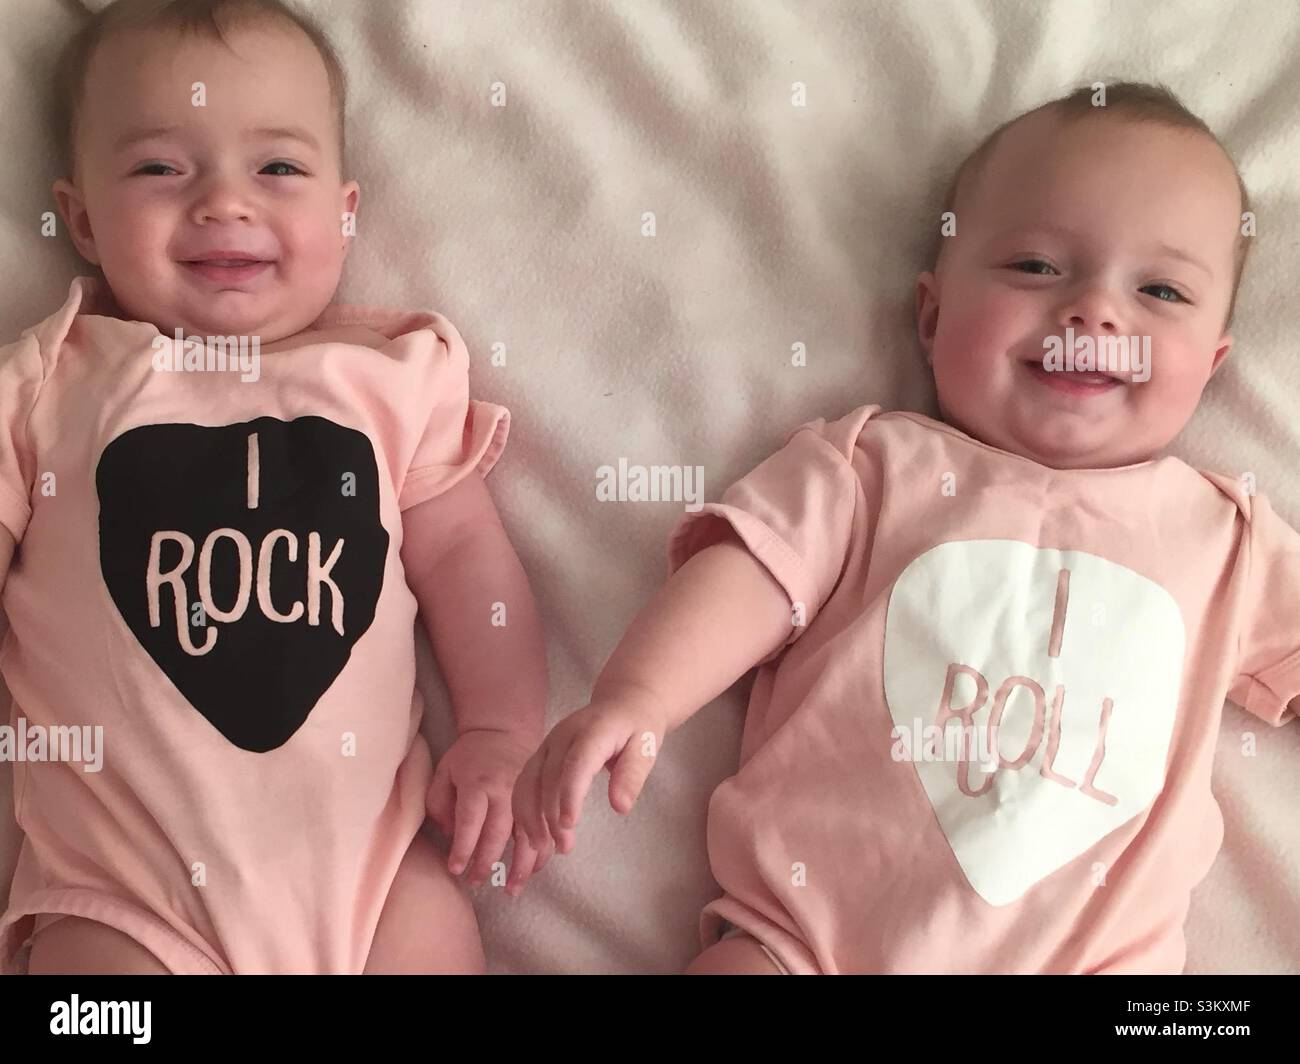 Rock and roll twins Stock Photo